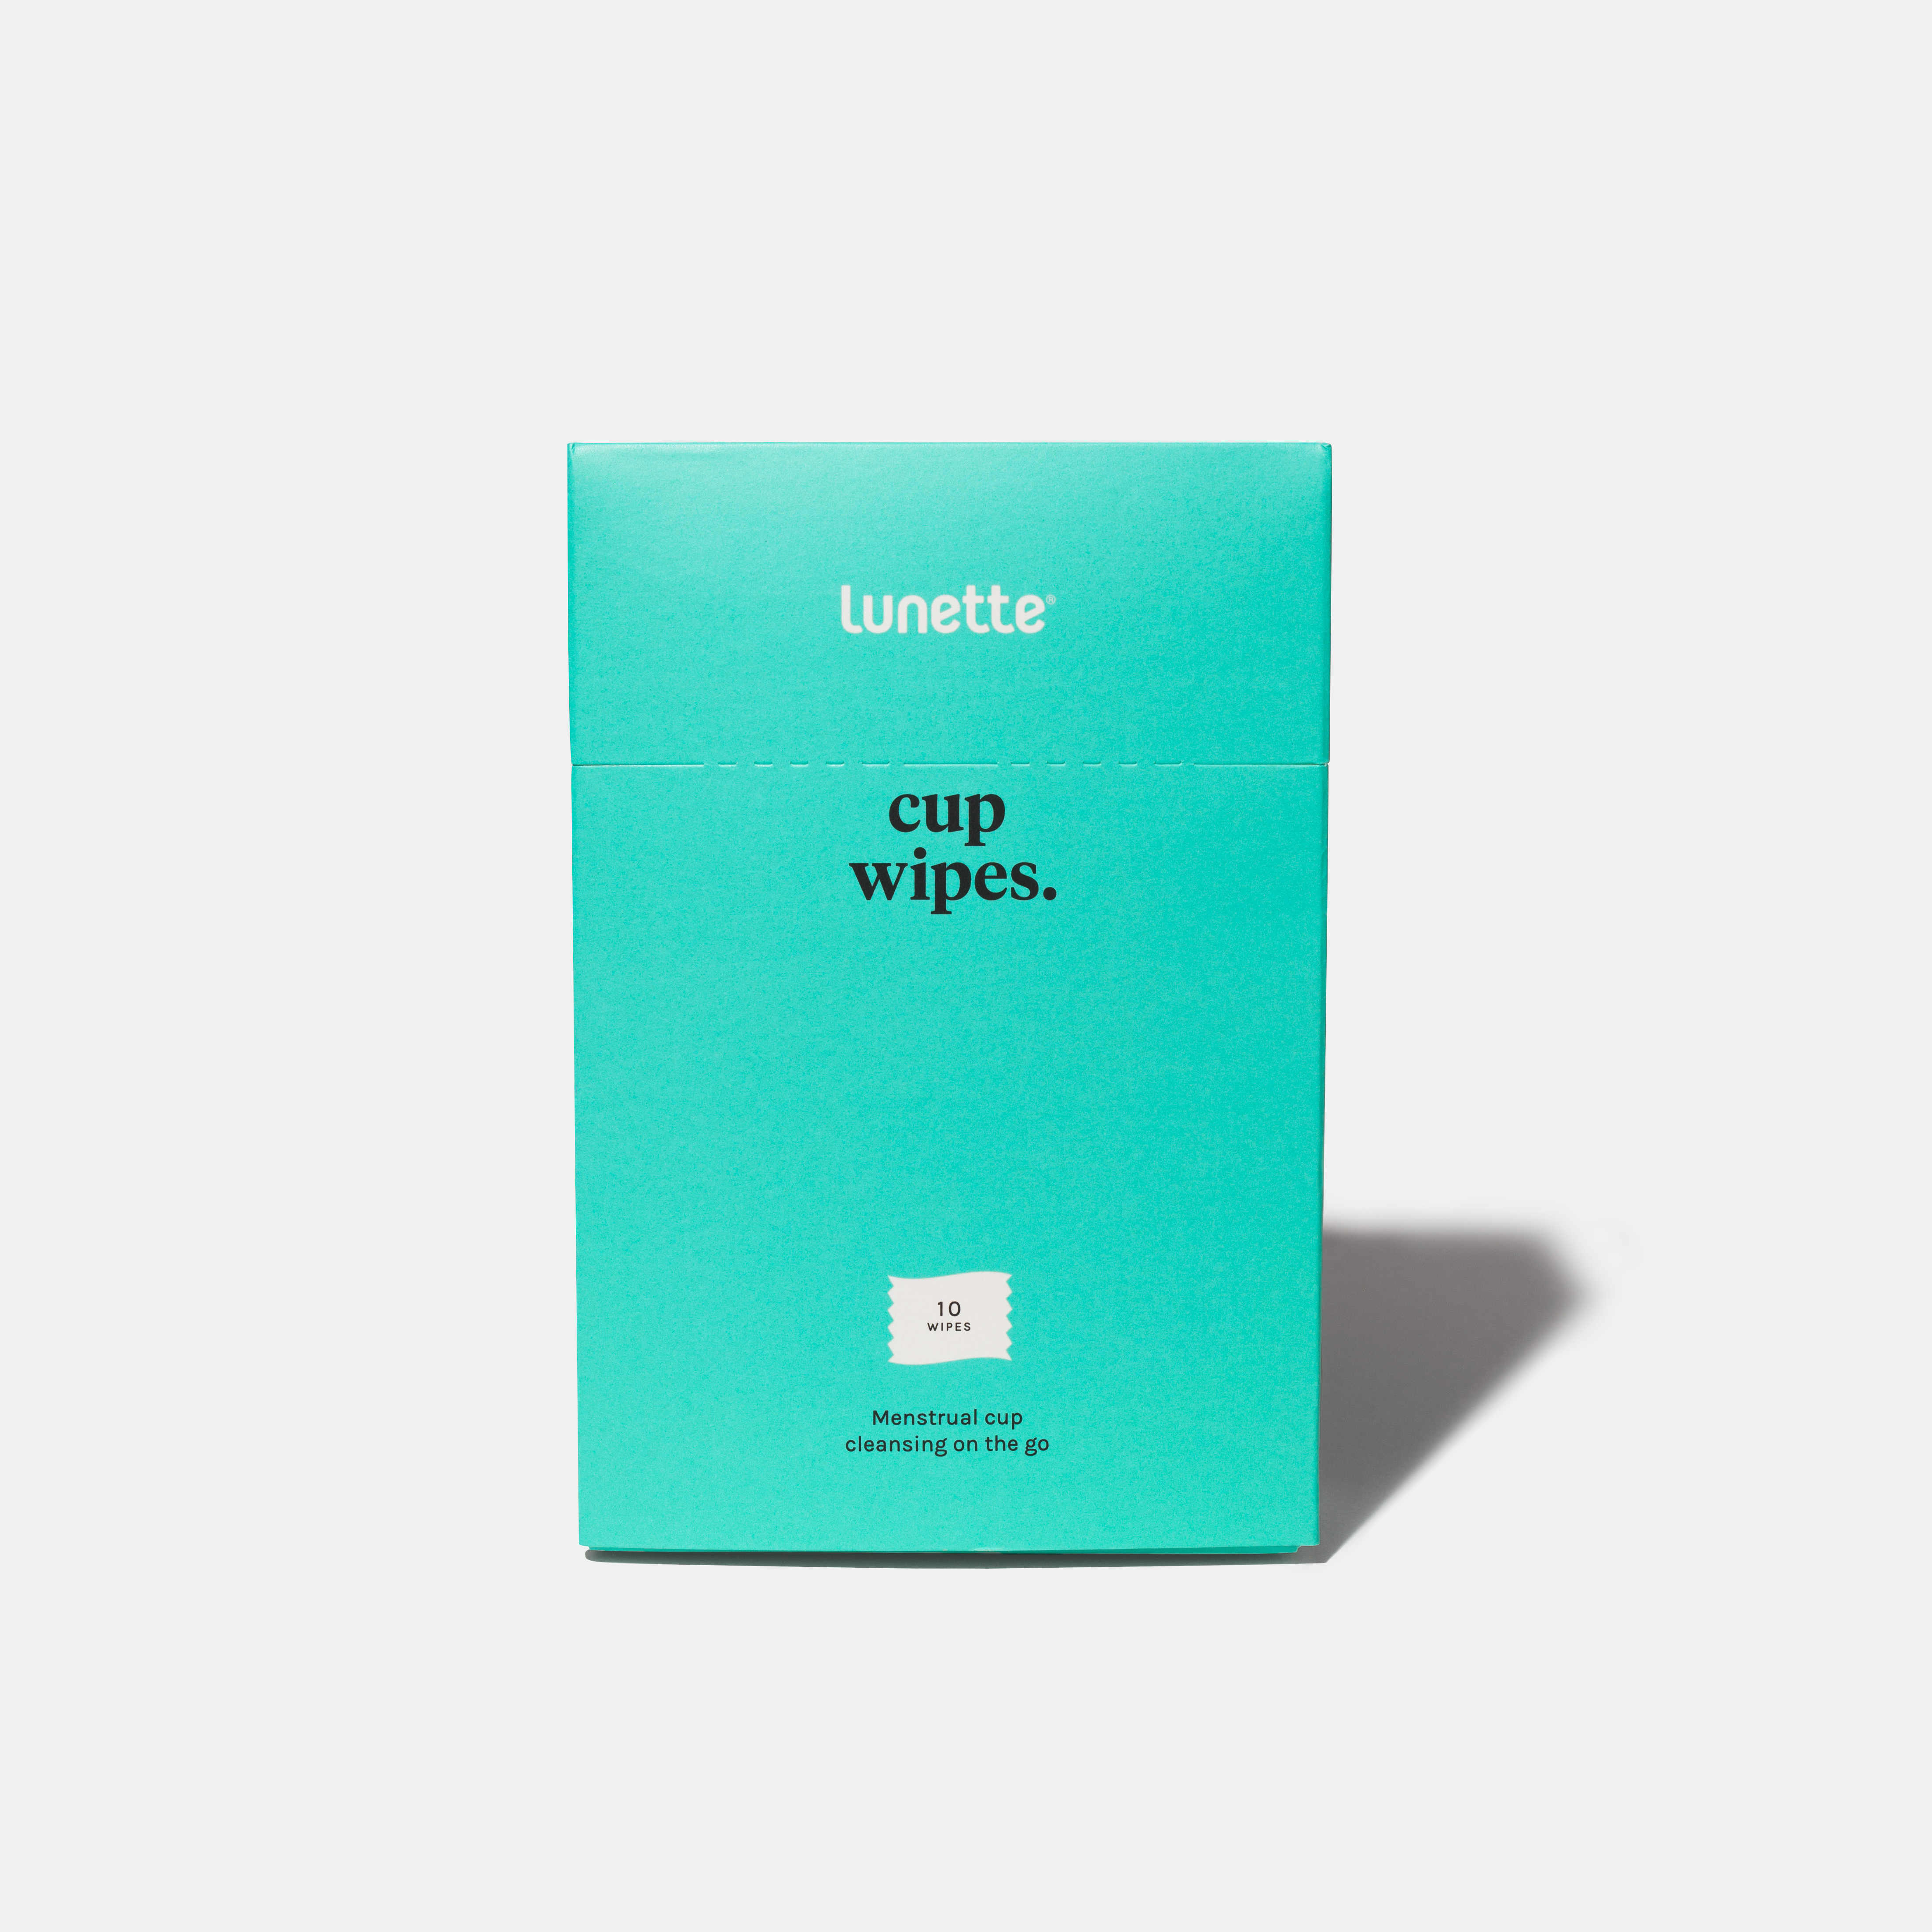 Lunette_cup_wipes_grey_highres